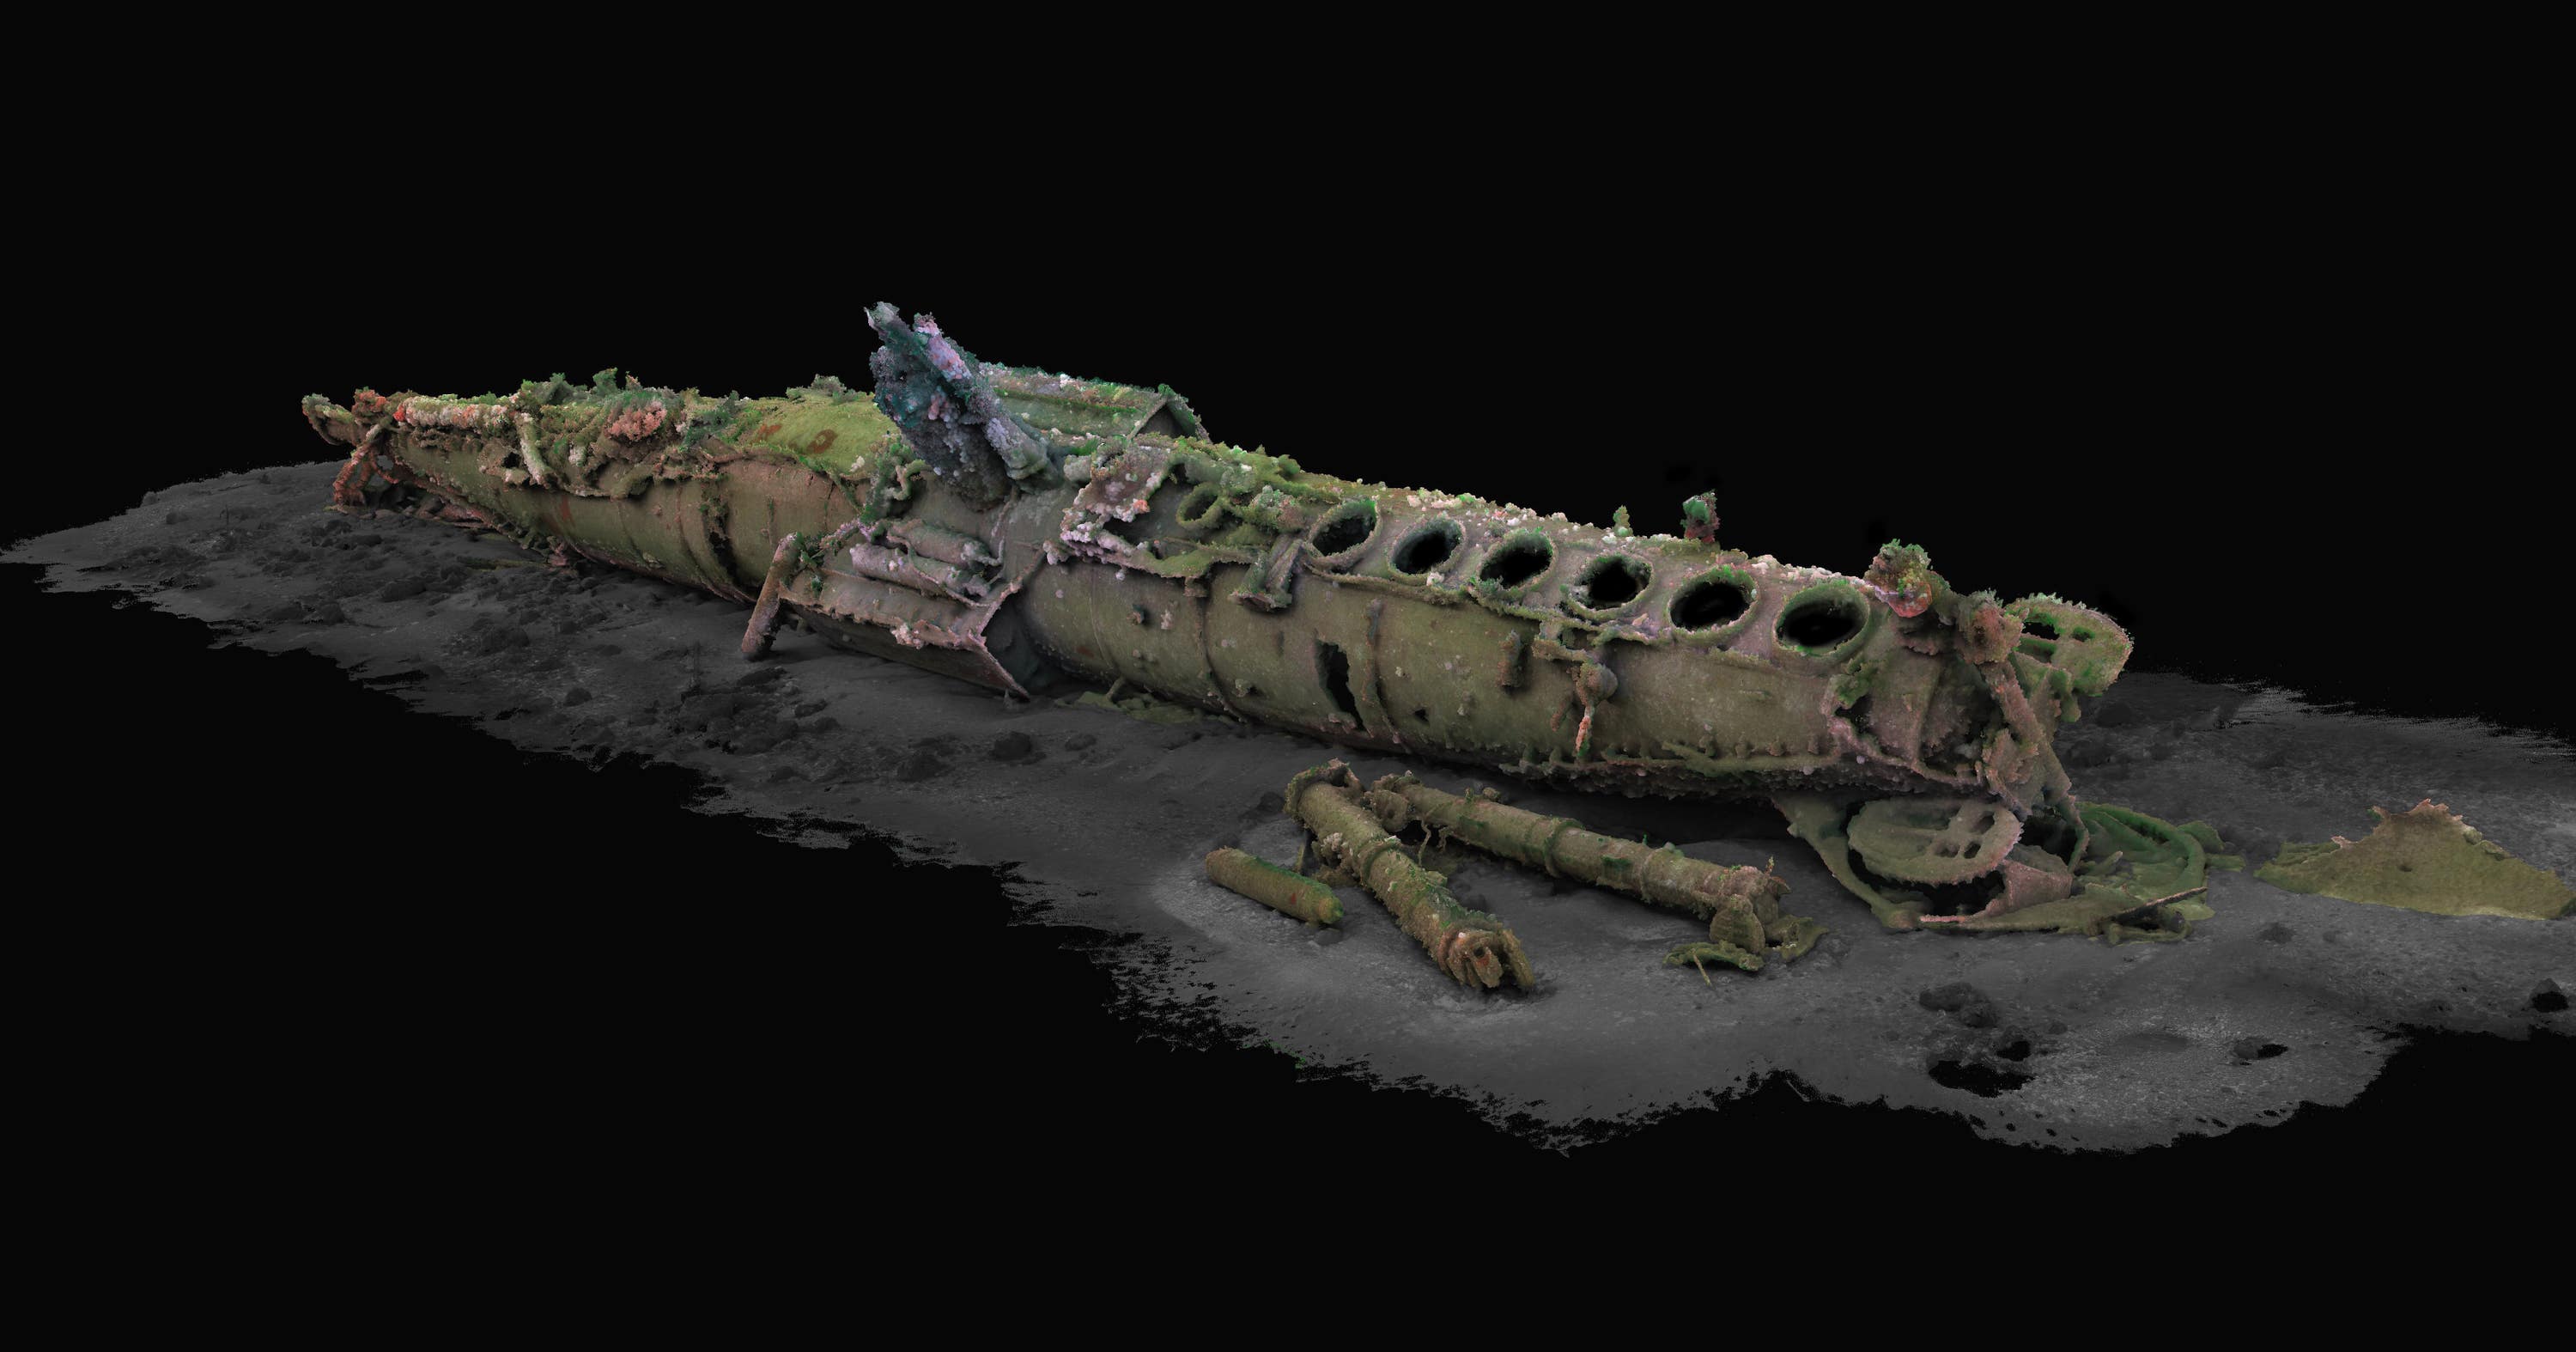 The wreck of UC-71 on the seabed.